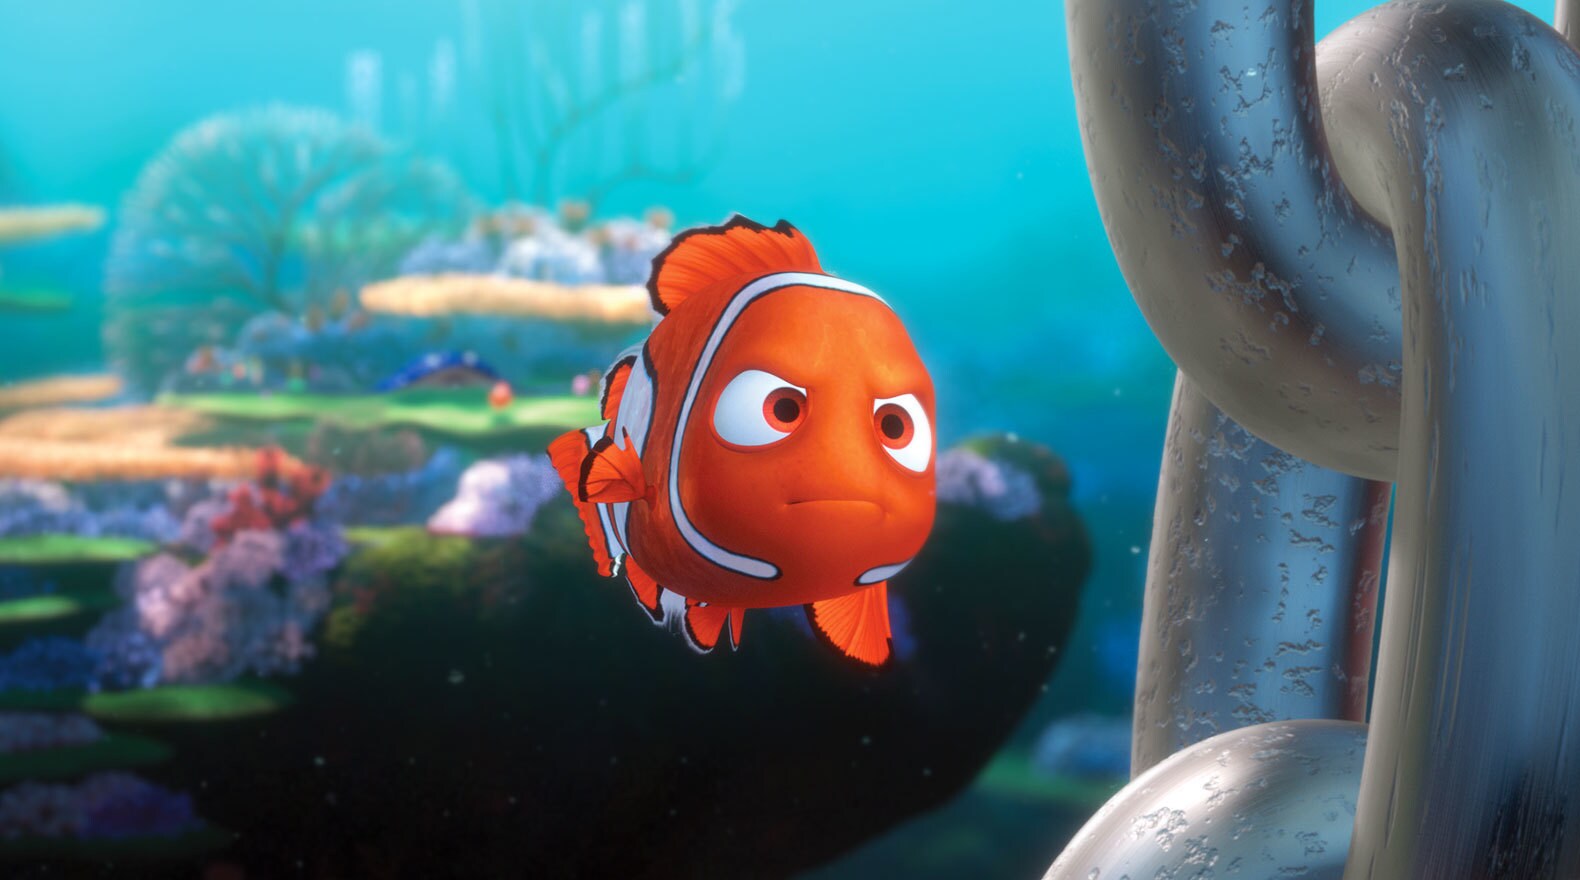 Nemo goes against Marlin’s wishes and swims past the drop off to prove that he’s brave.